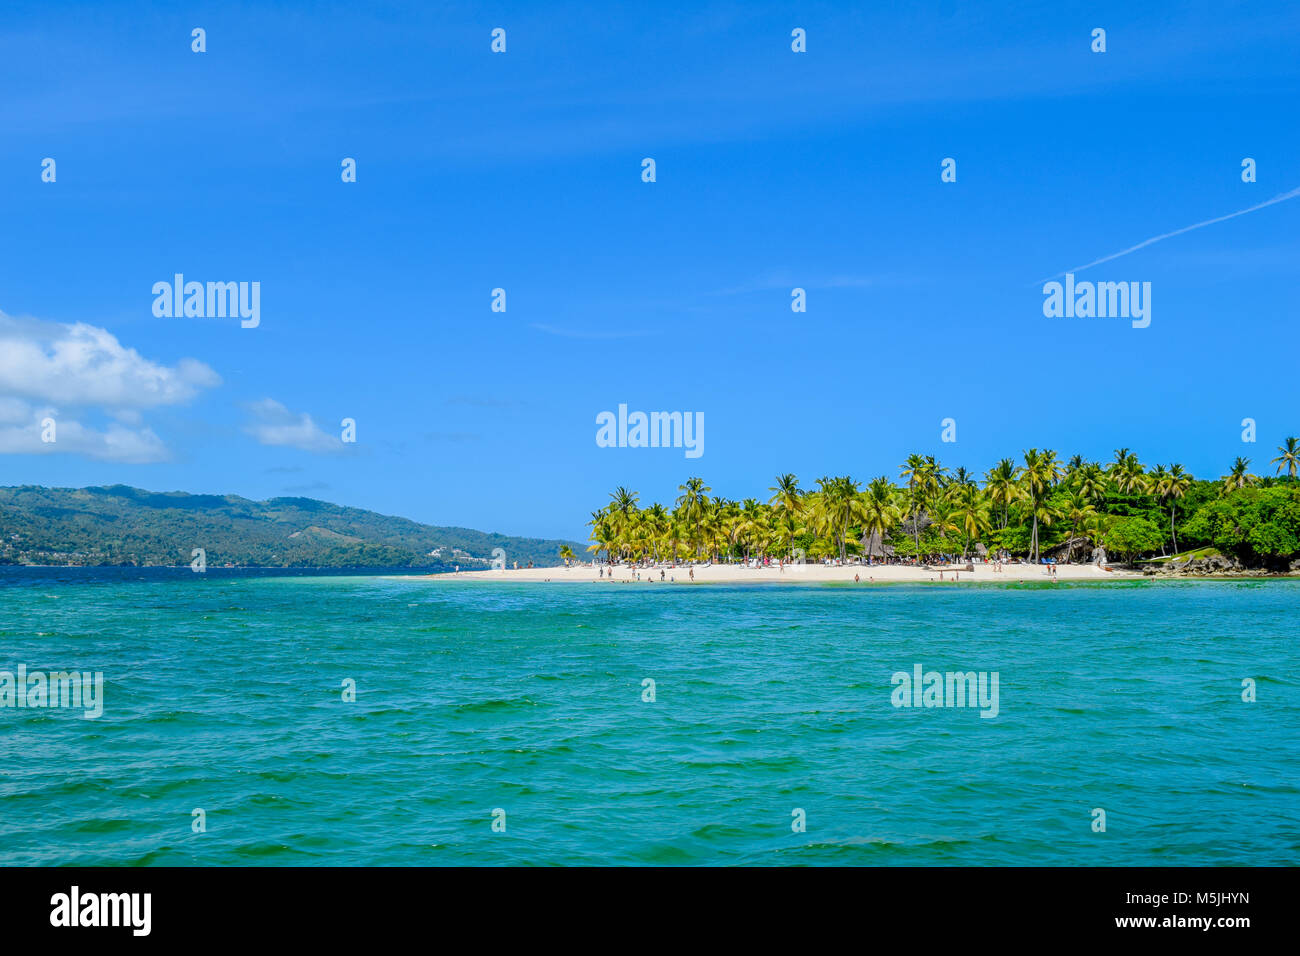 Beautiful caribbean Island with white sandy beach, blue sky, sunbeds and many palms, holiday feelings, Dominican Republic, tourism Stock Photo